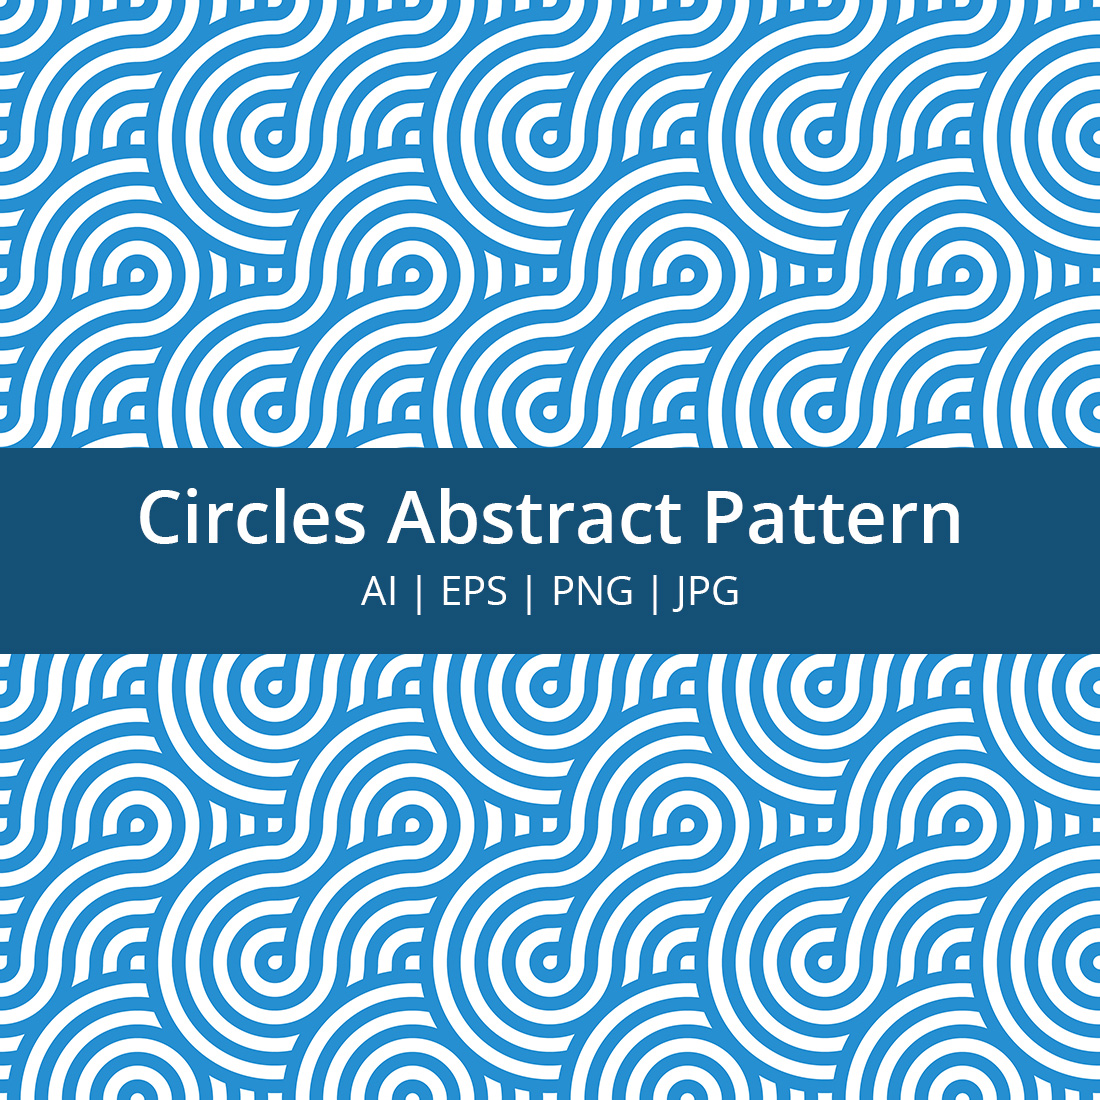 Circles abstract pattern in blue and white.